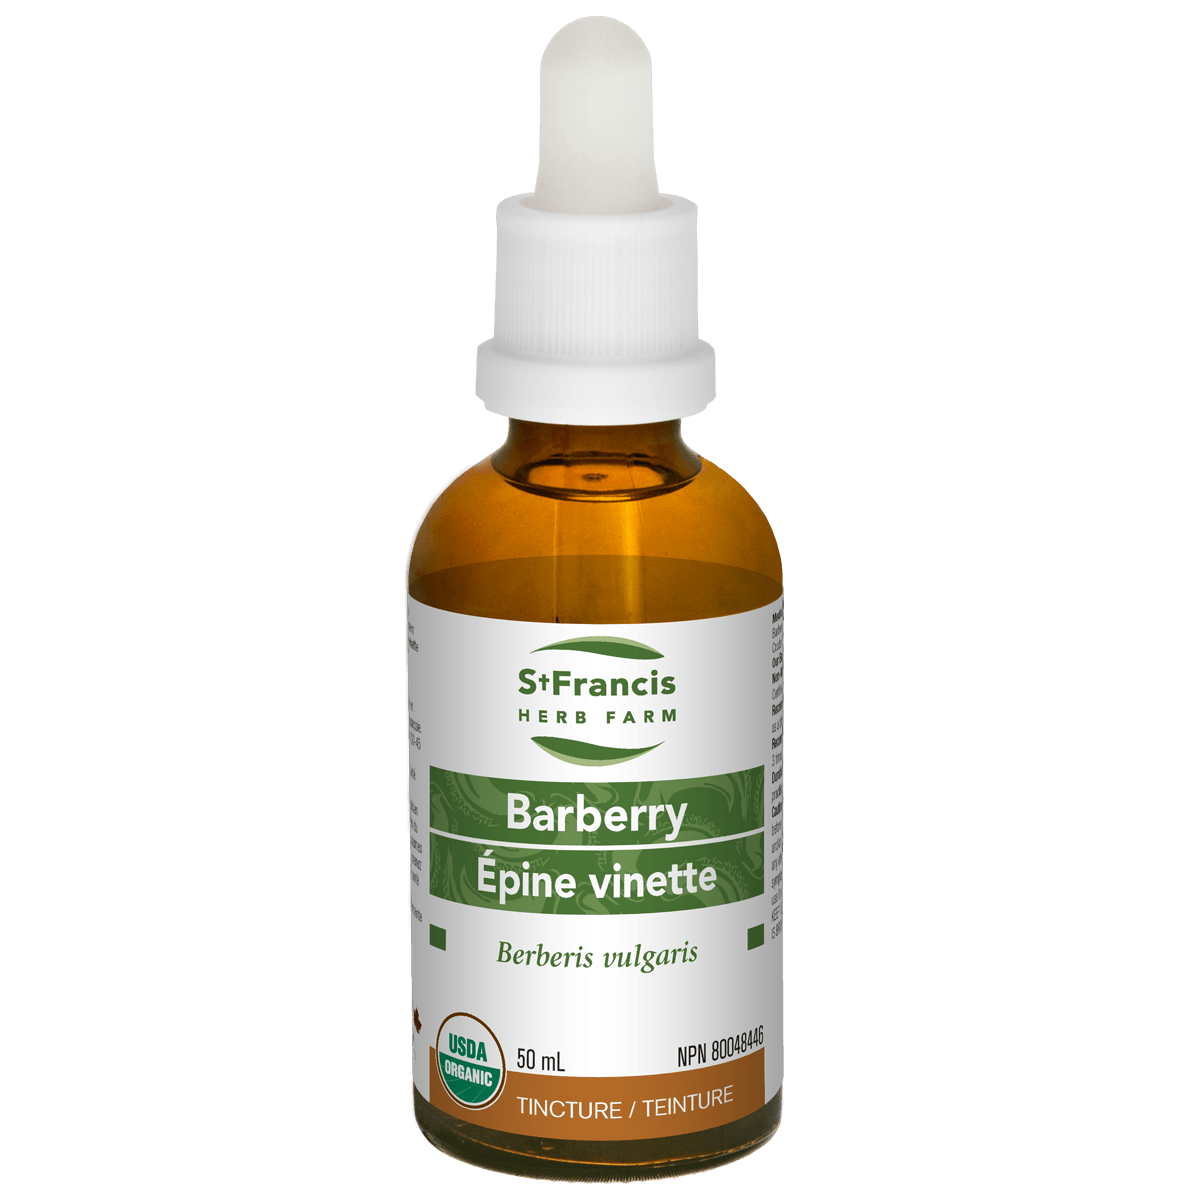 St. Francis Barberry 50ml